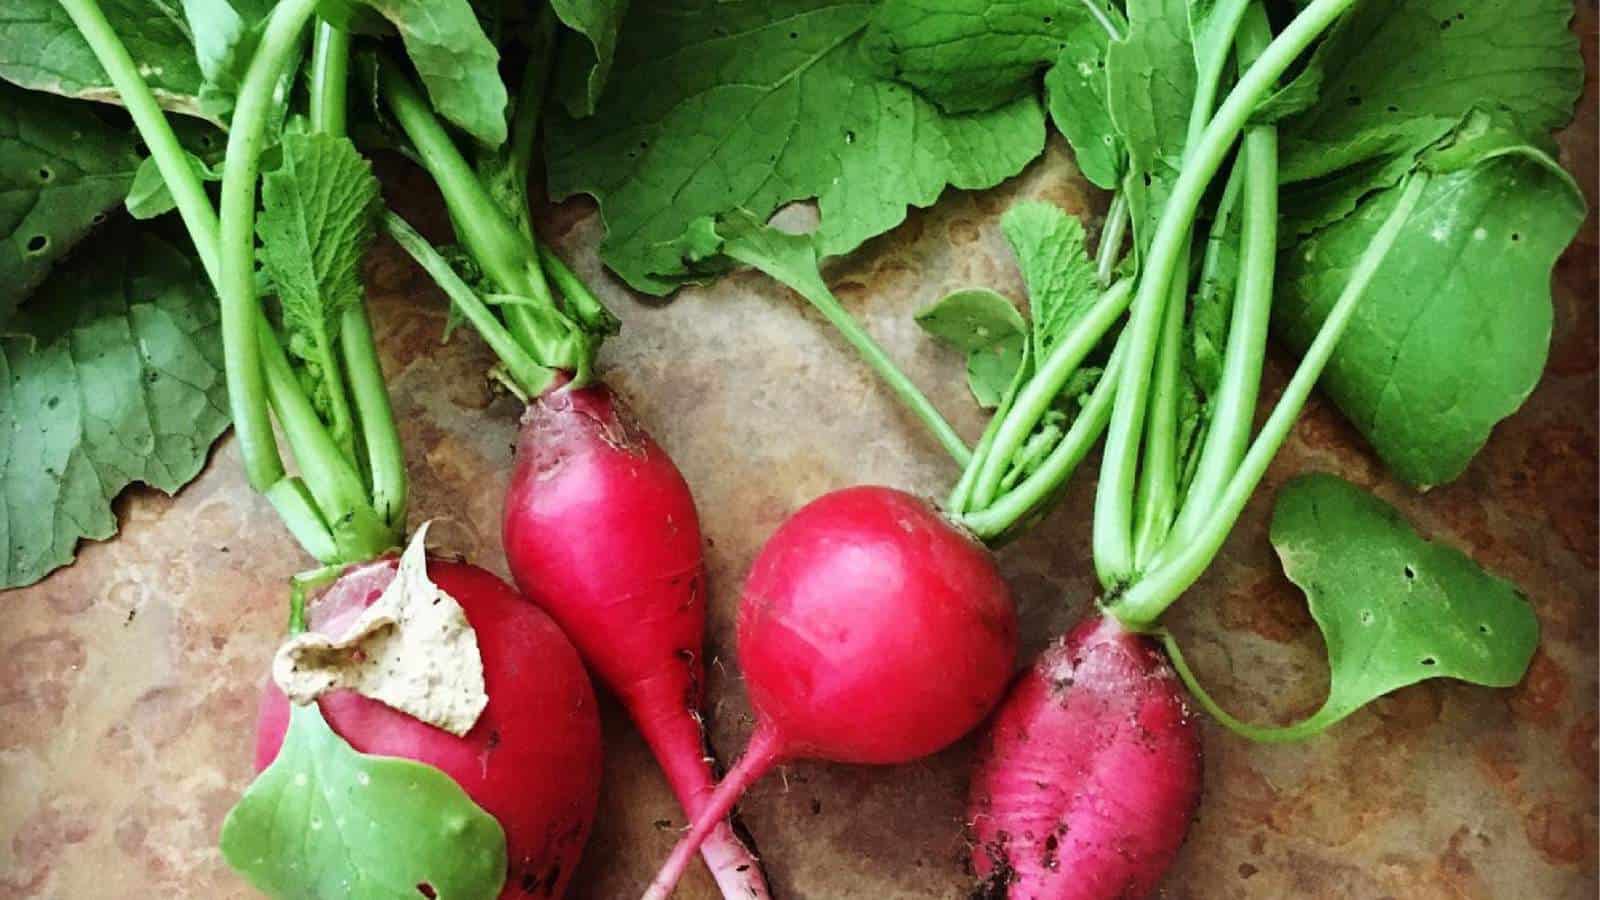 Homegrown radishes grown with natural fertilizer.